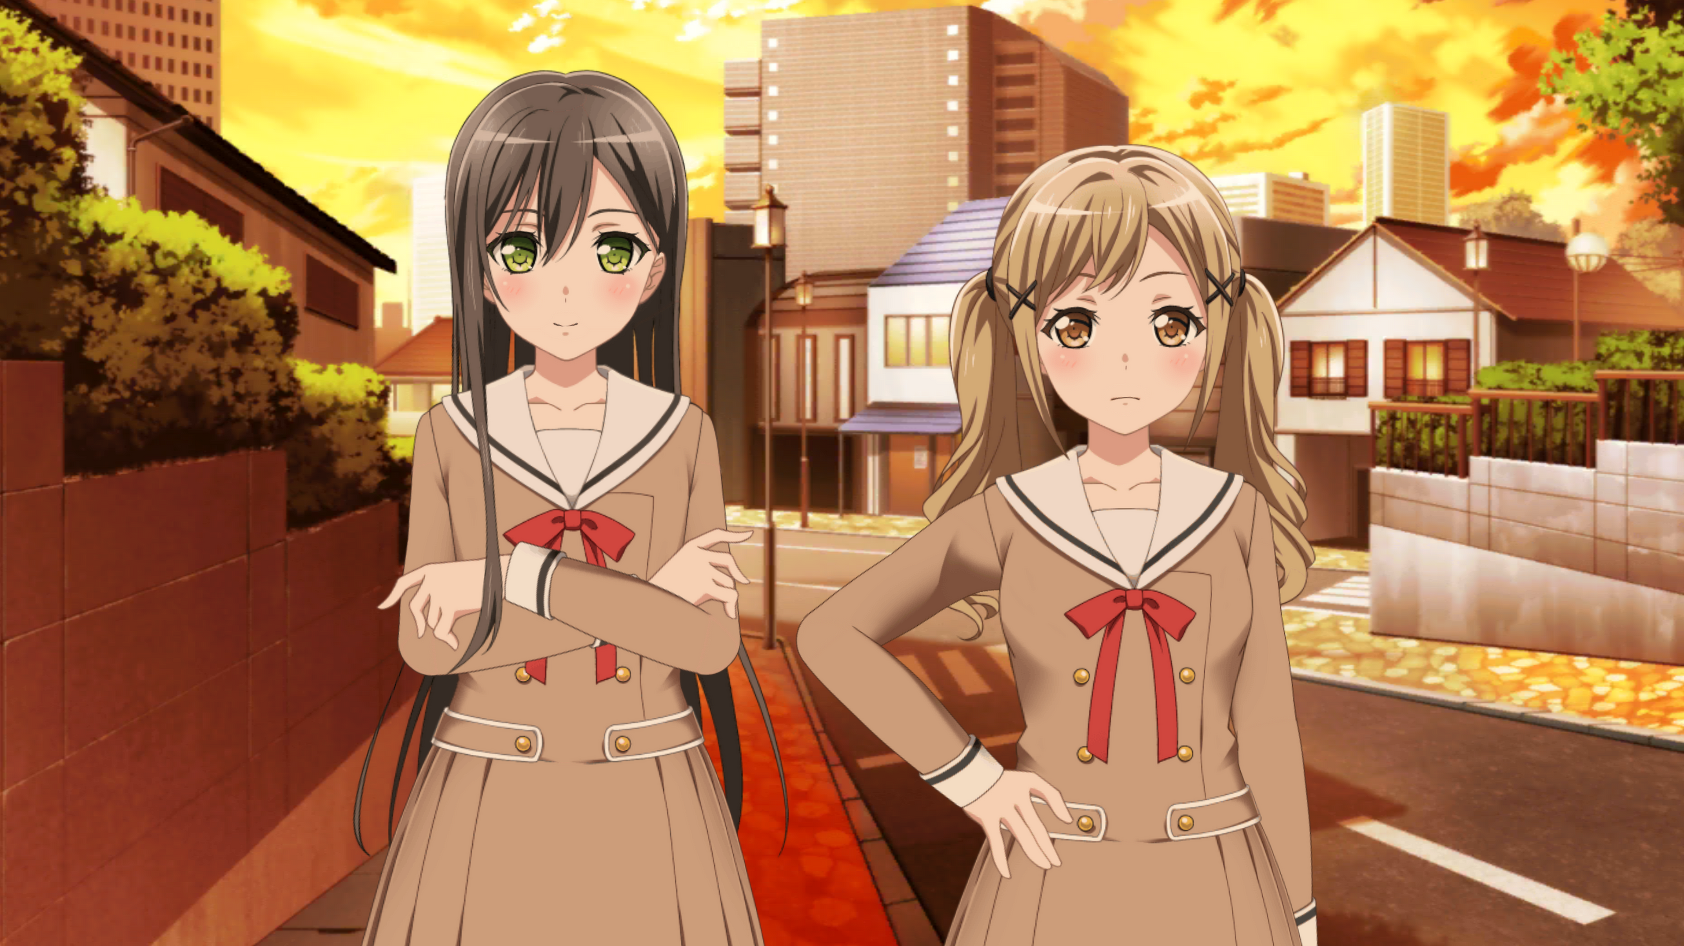 ONE OF US (Event), BanG Dream! Wikia